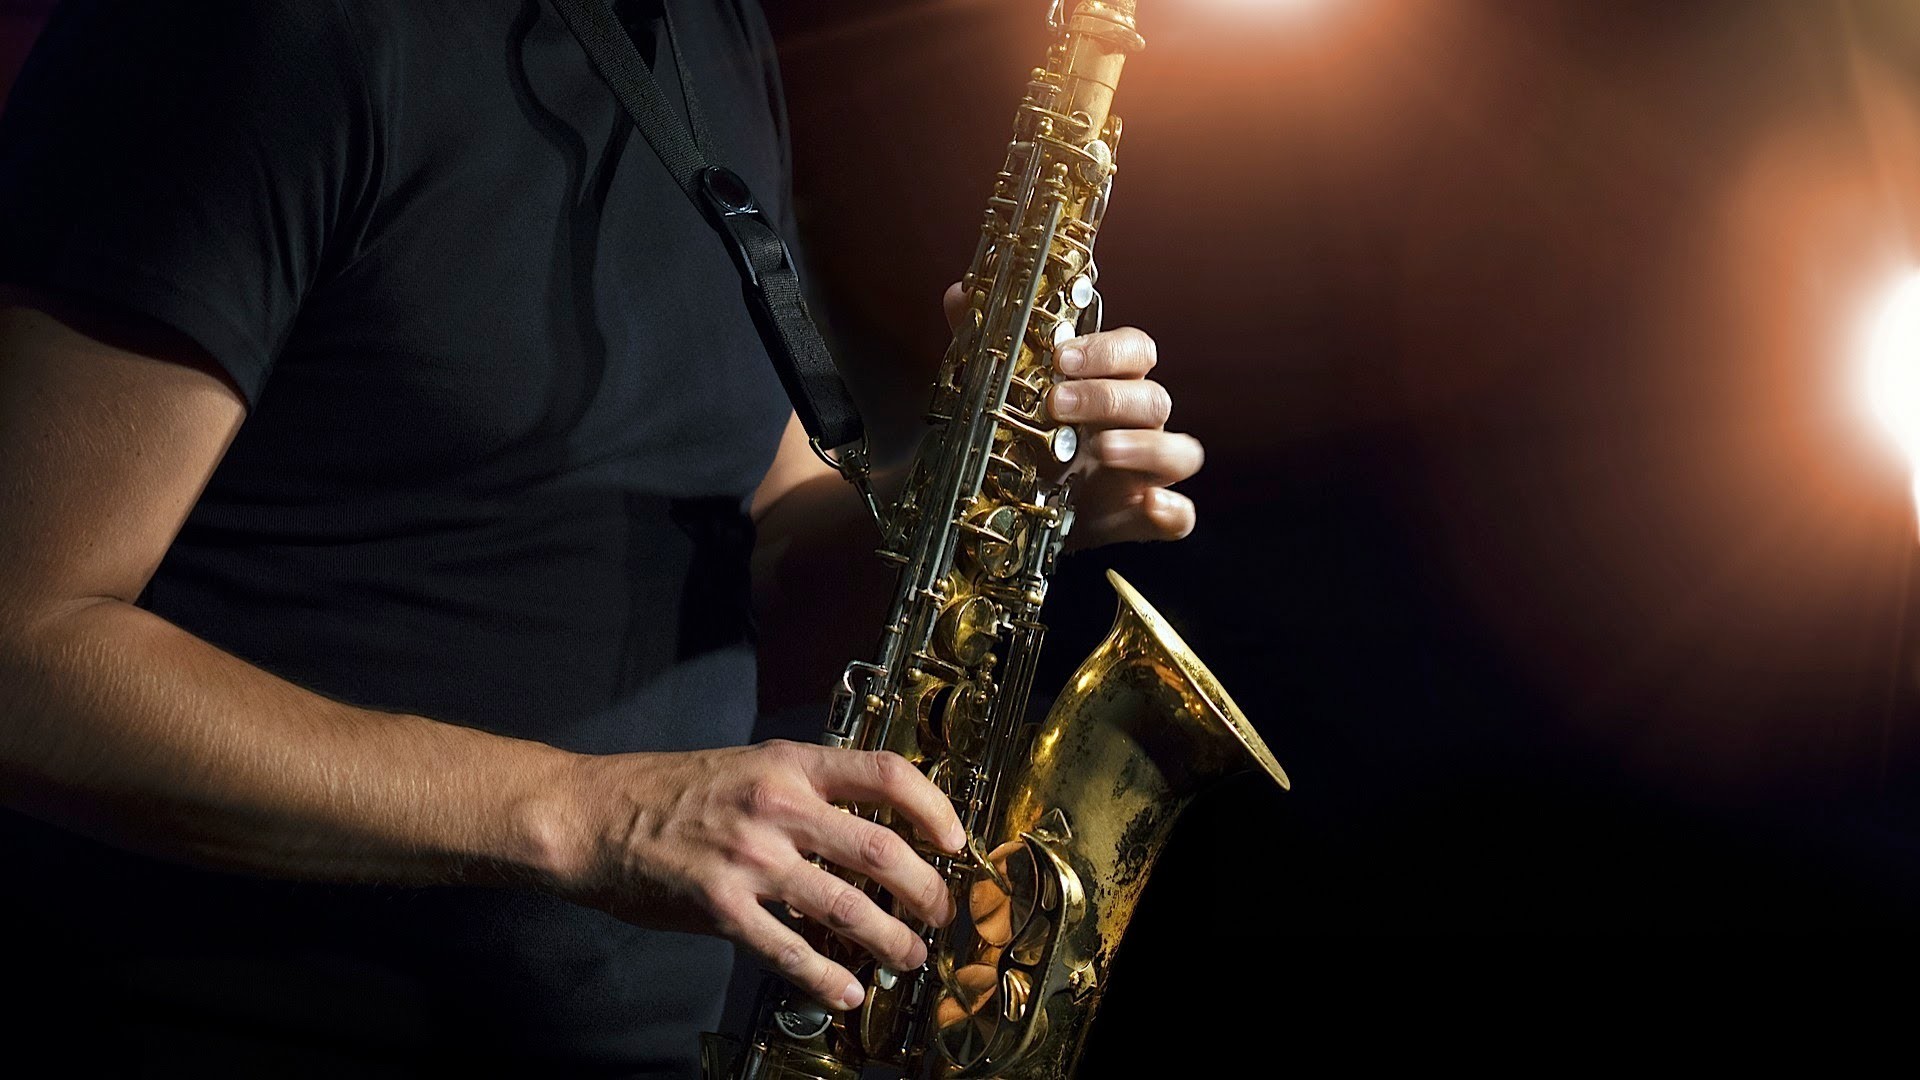 Download Saxophone wallpapers for mobile phone free Saxophone HD  pictures